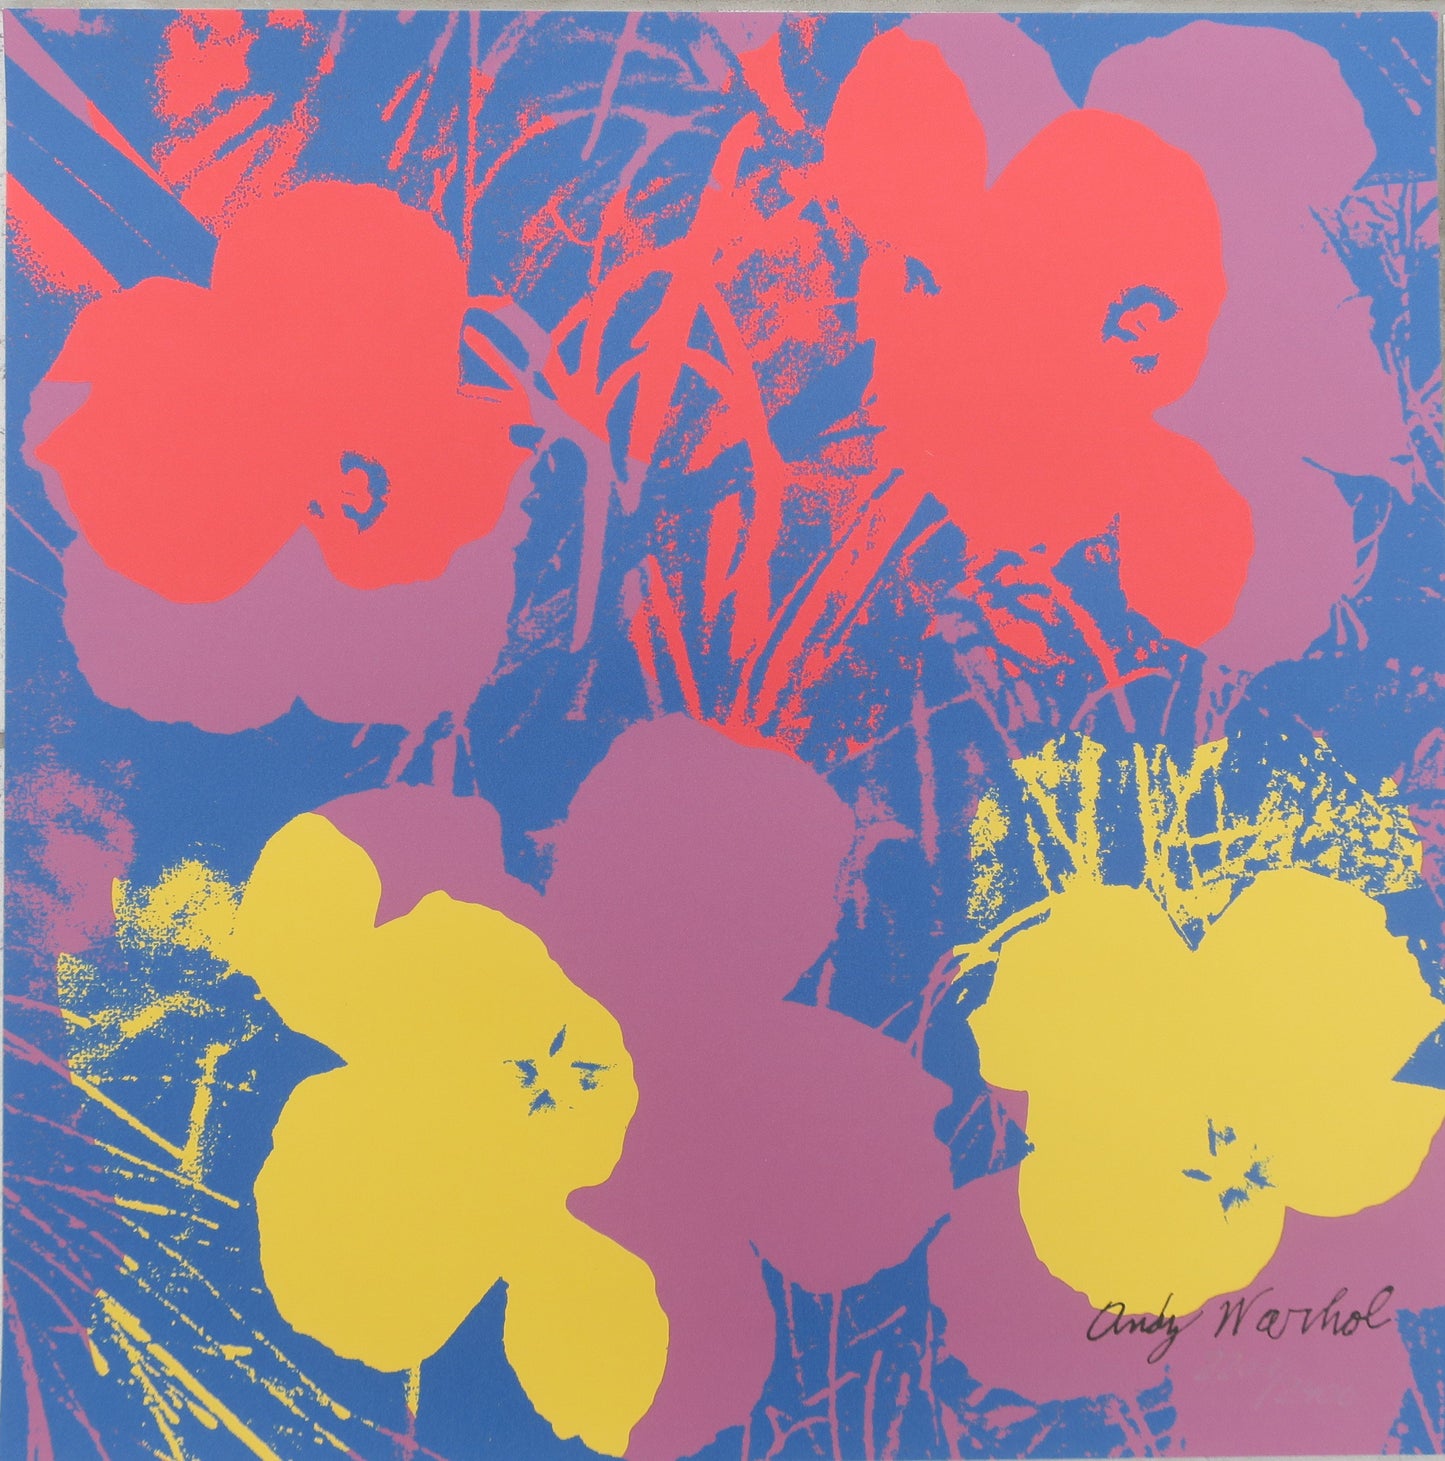 Andy Warhol Flowers signed lithograph